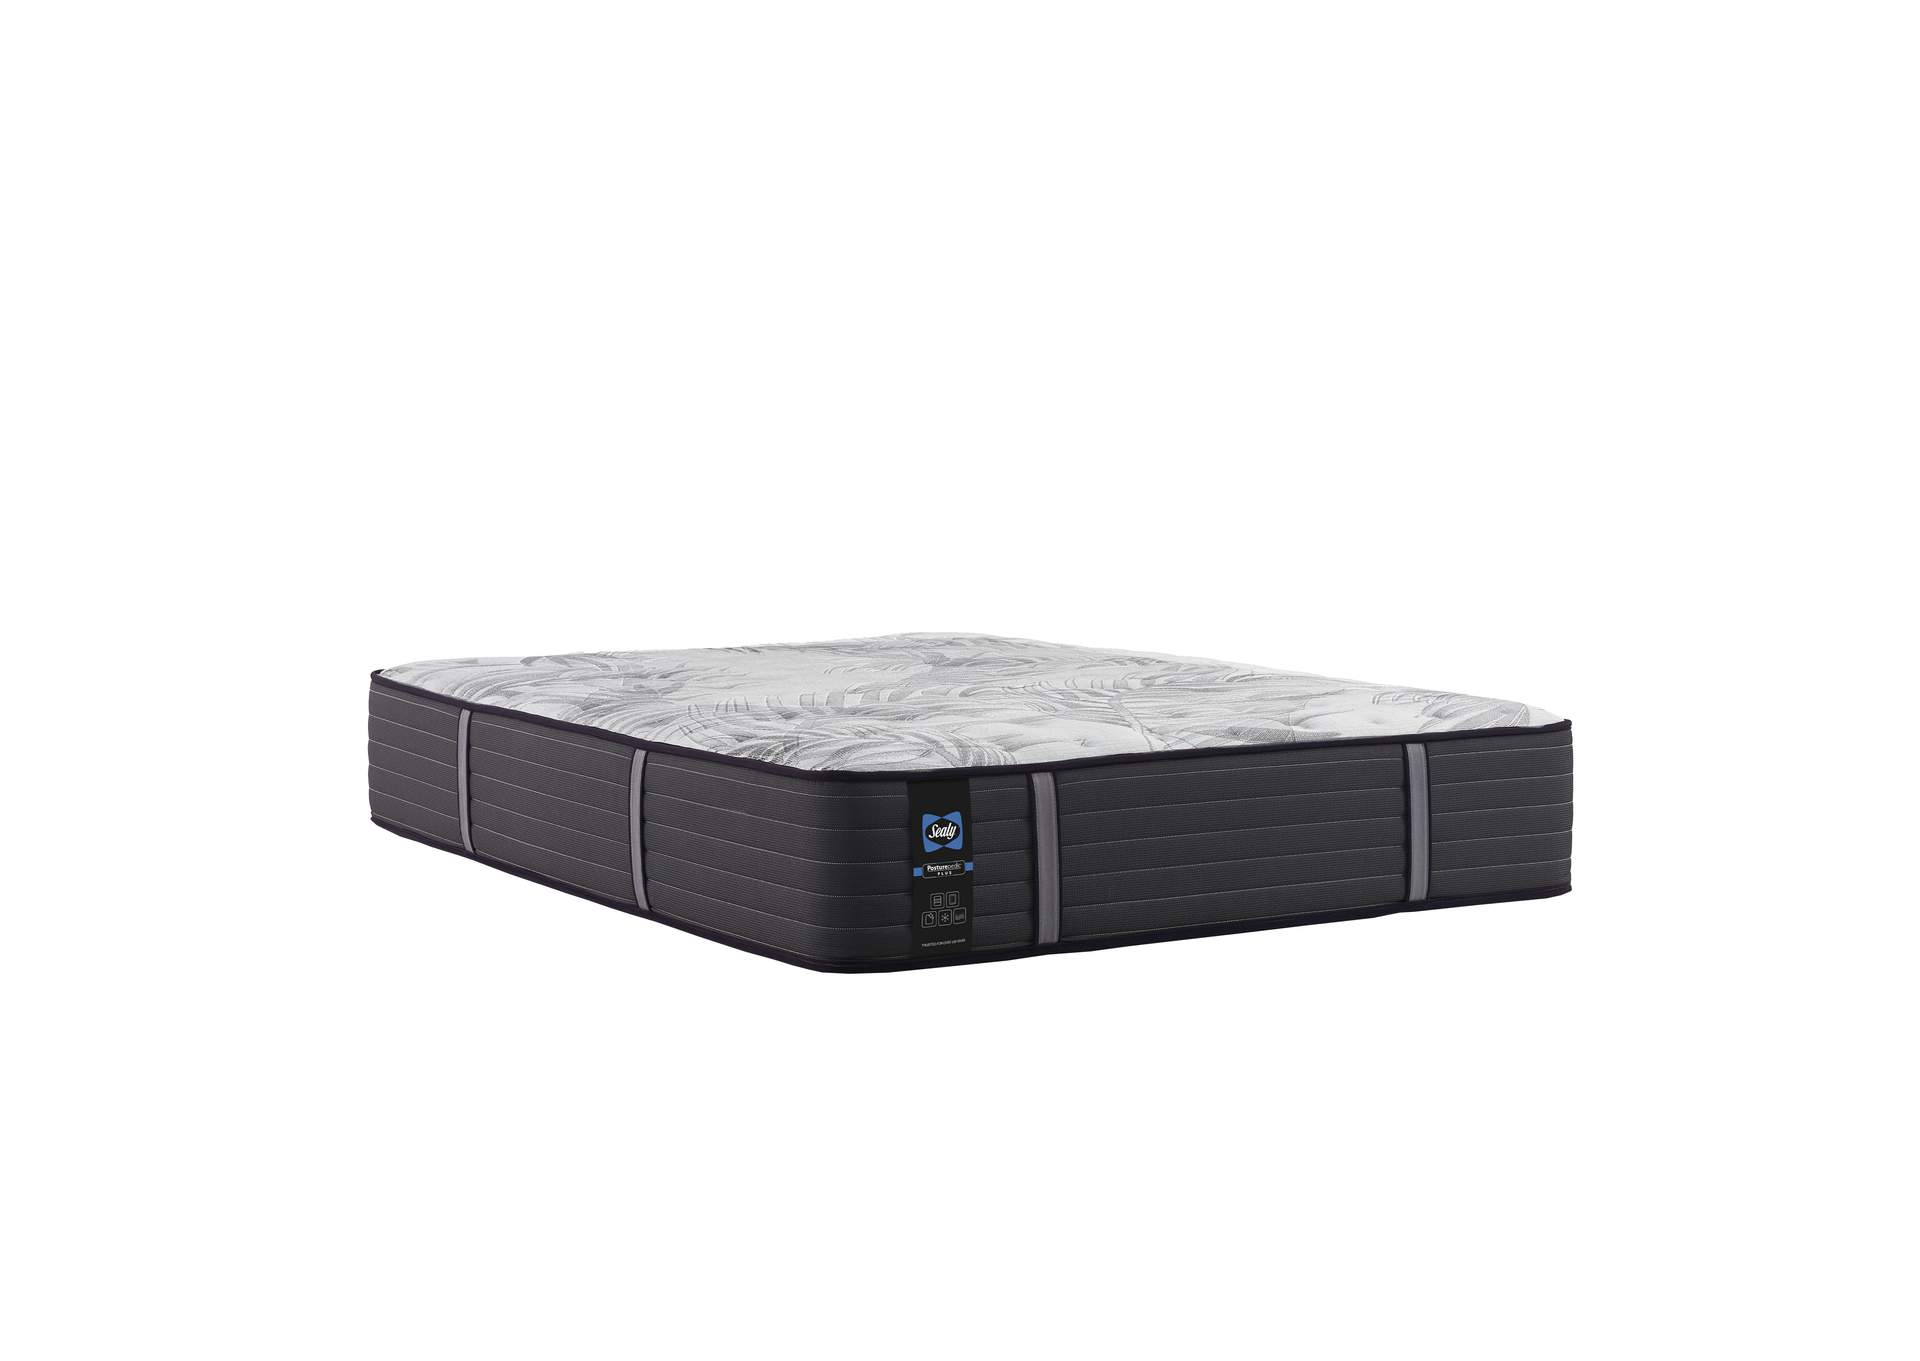 Victorious Soft Tight Top King Mattress,Sealy